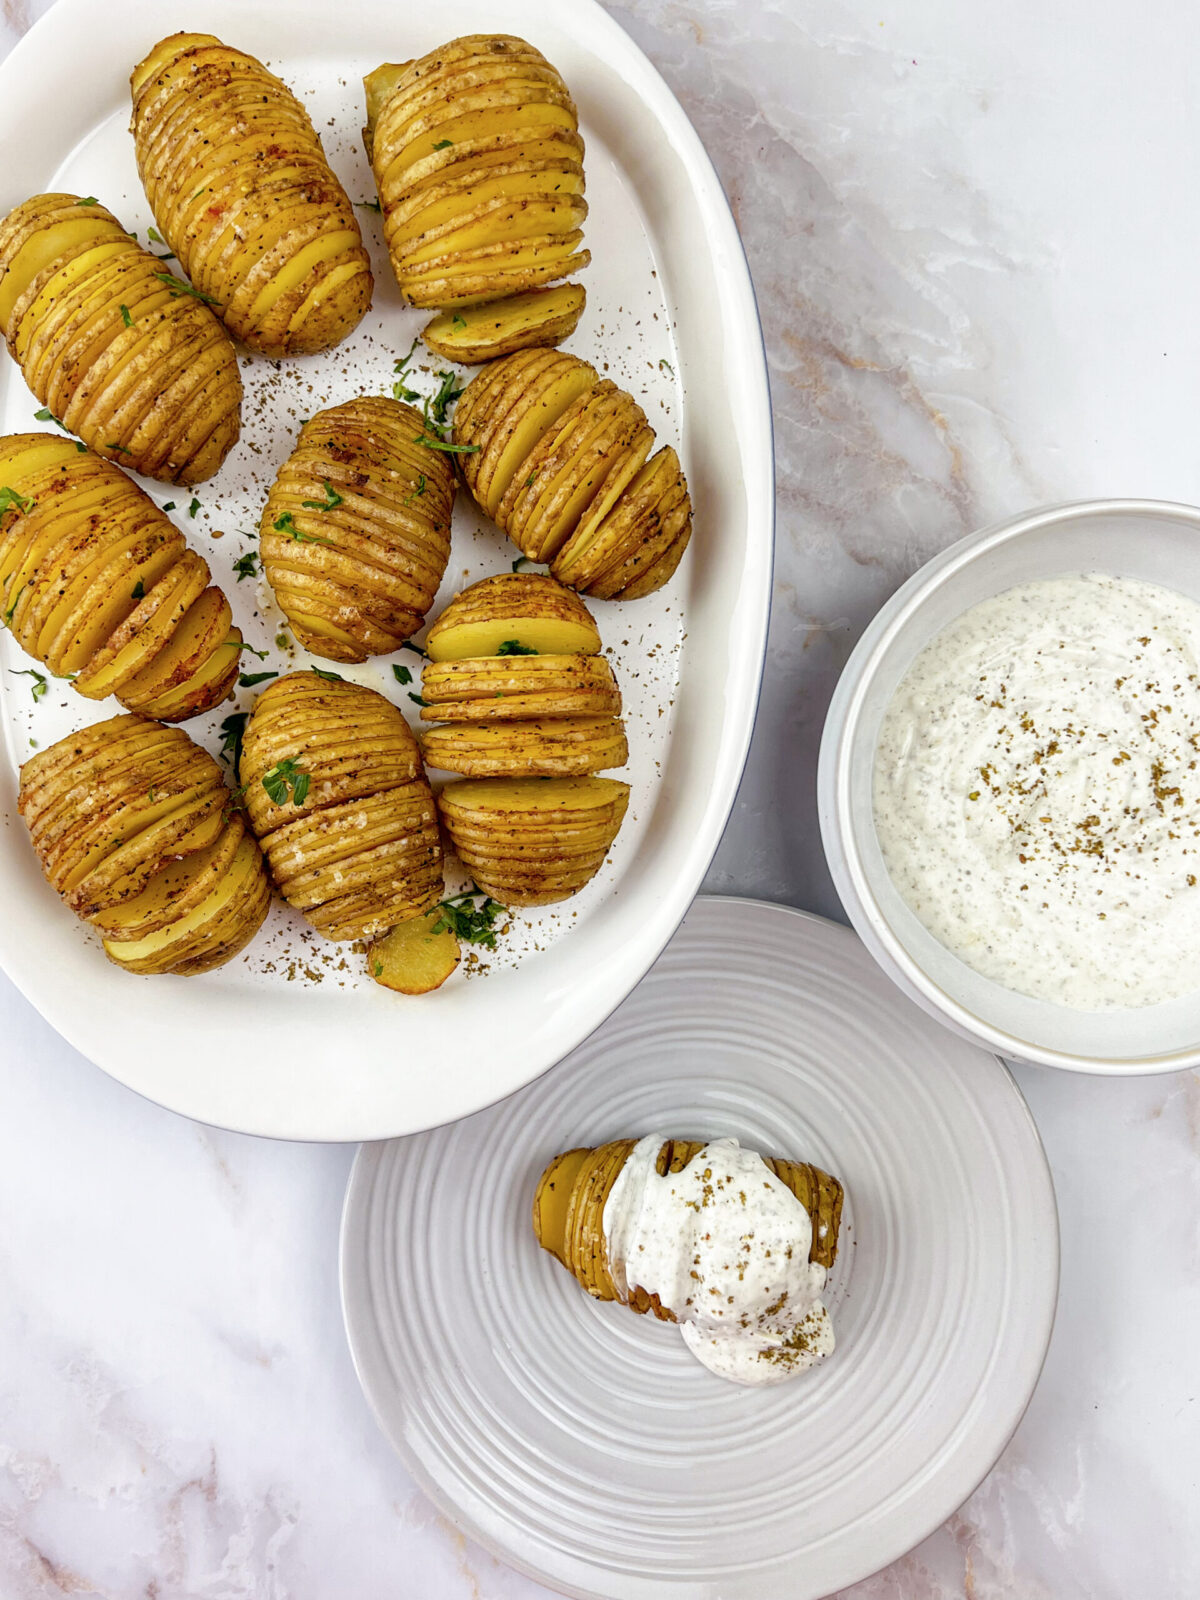 A close-up of a delicious hassle potato dish with creamy yogurt sauce and zaatar seasoning.